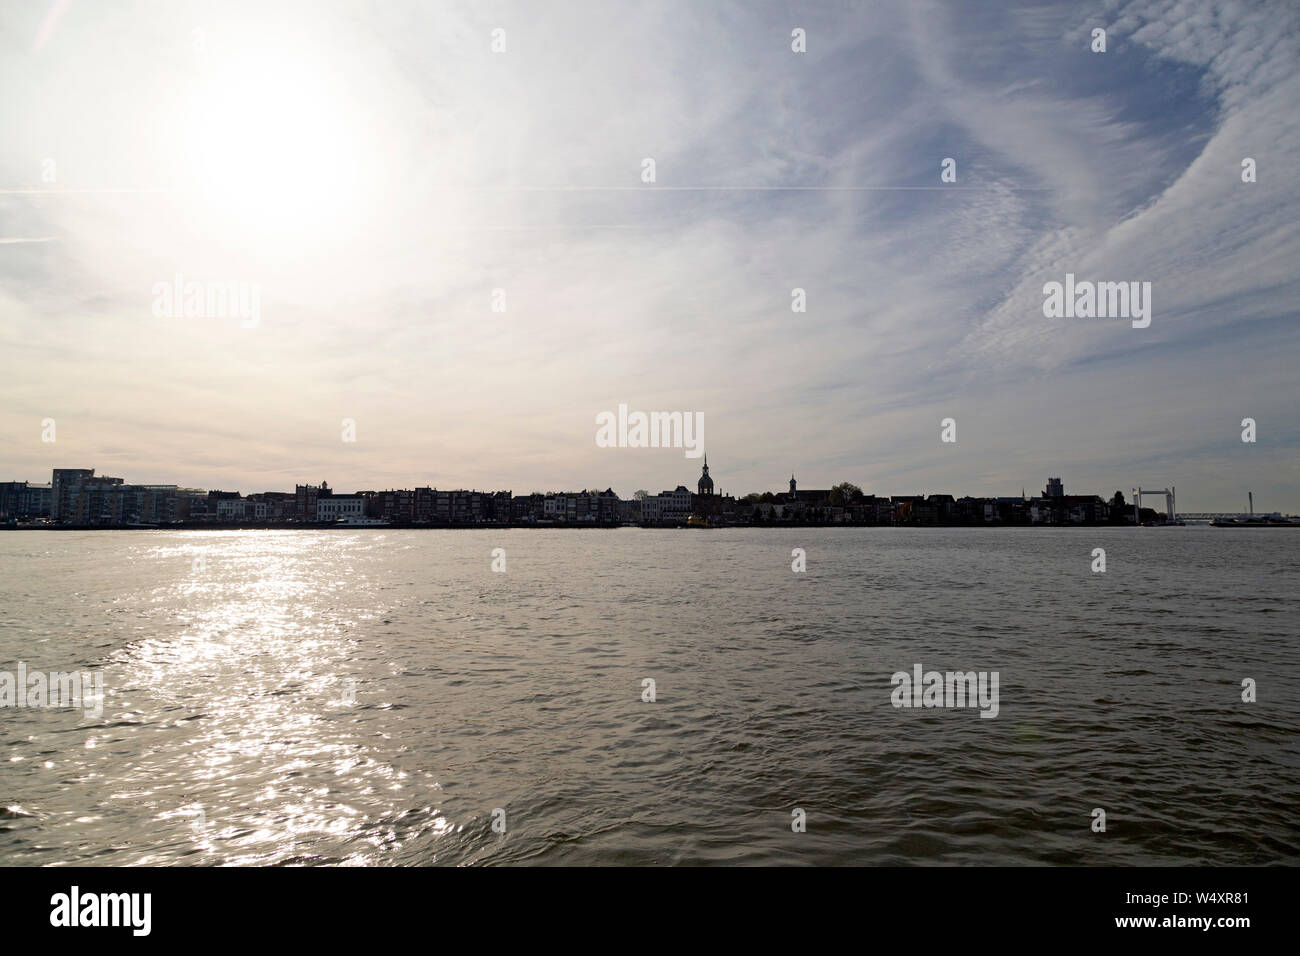 The skyline of Dordrecht in the Netherlands, Dordrecht is an island city and the oldest city in Holland. Stock Photo